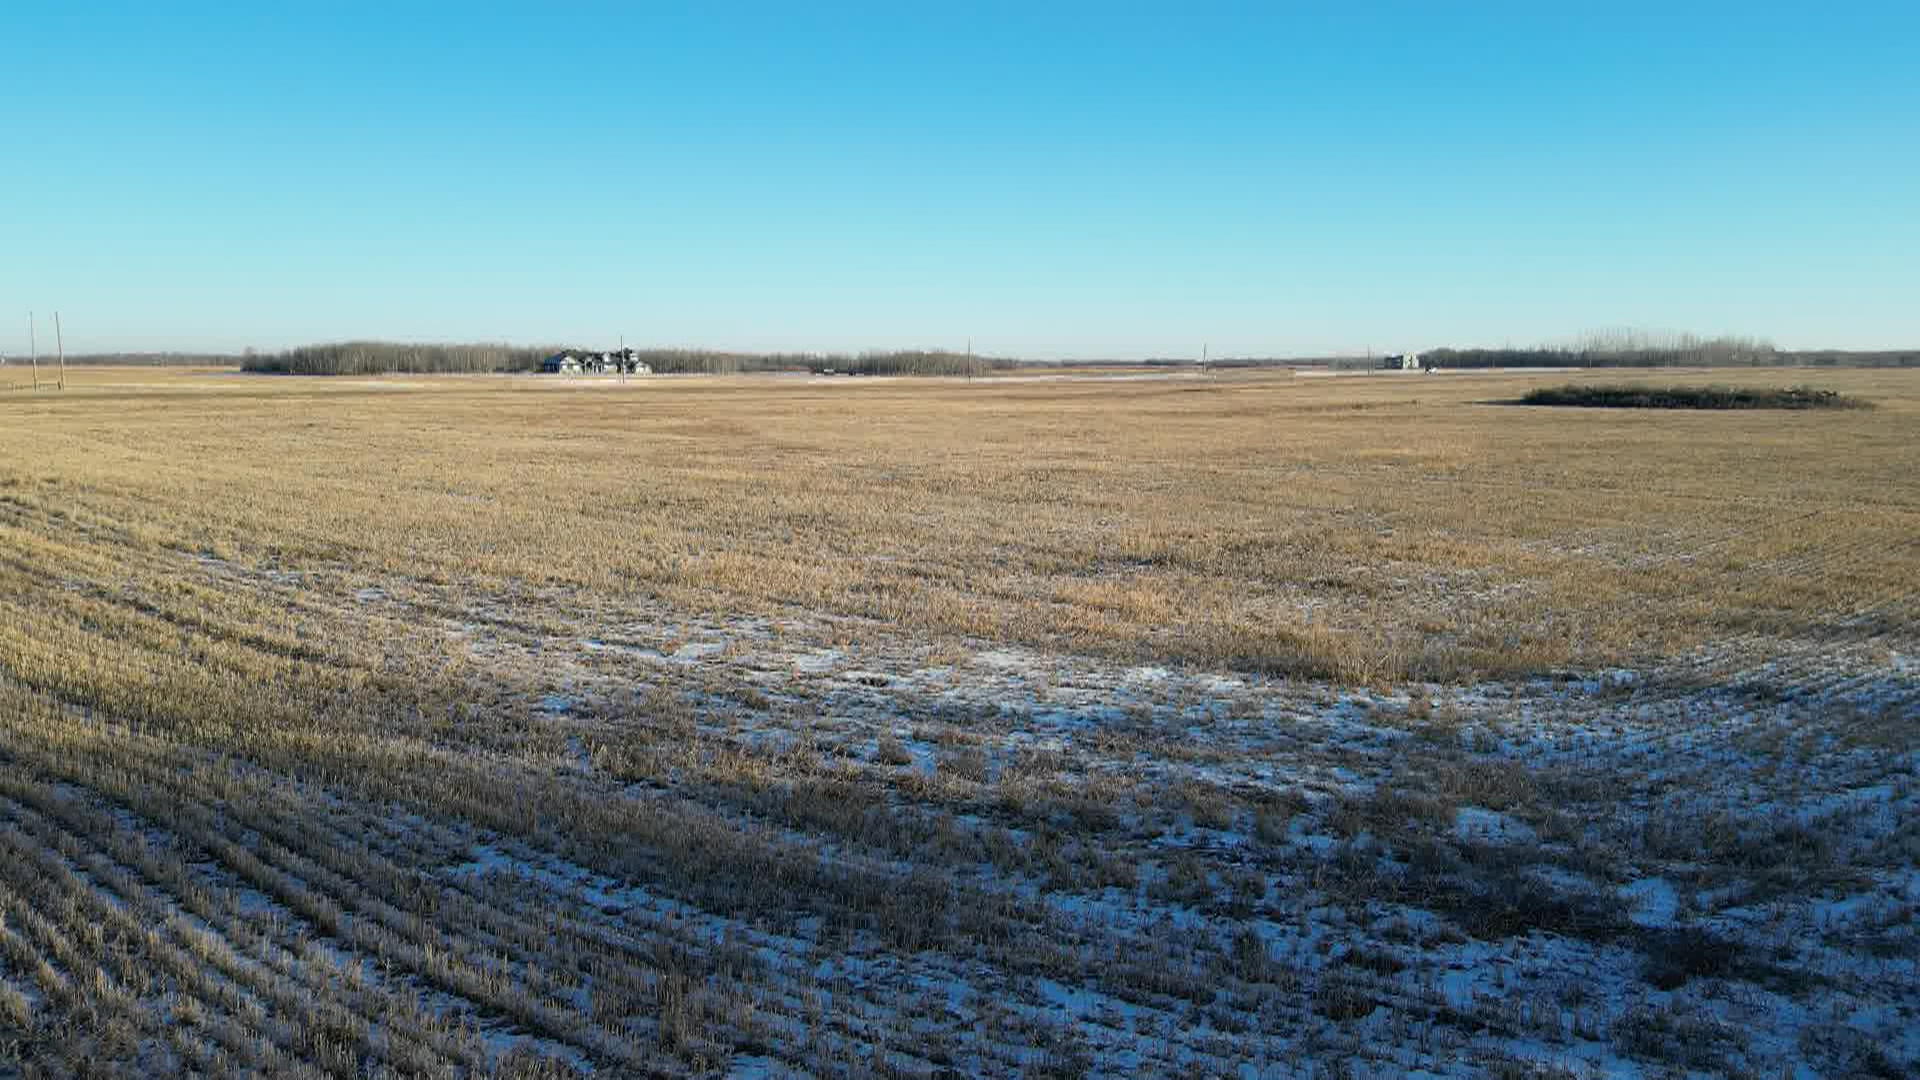 Saskatchewan farmers hoping spring rainfall will make up for lack of snow